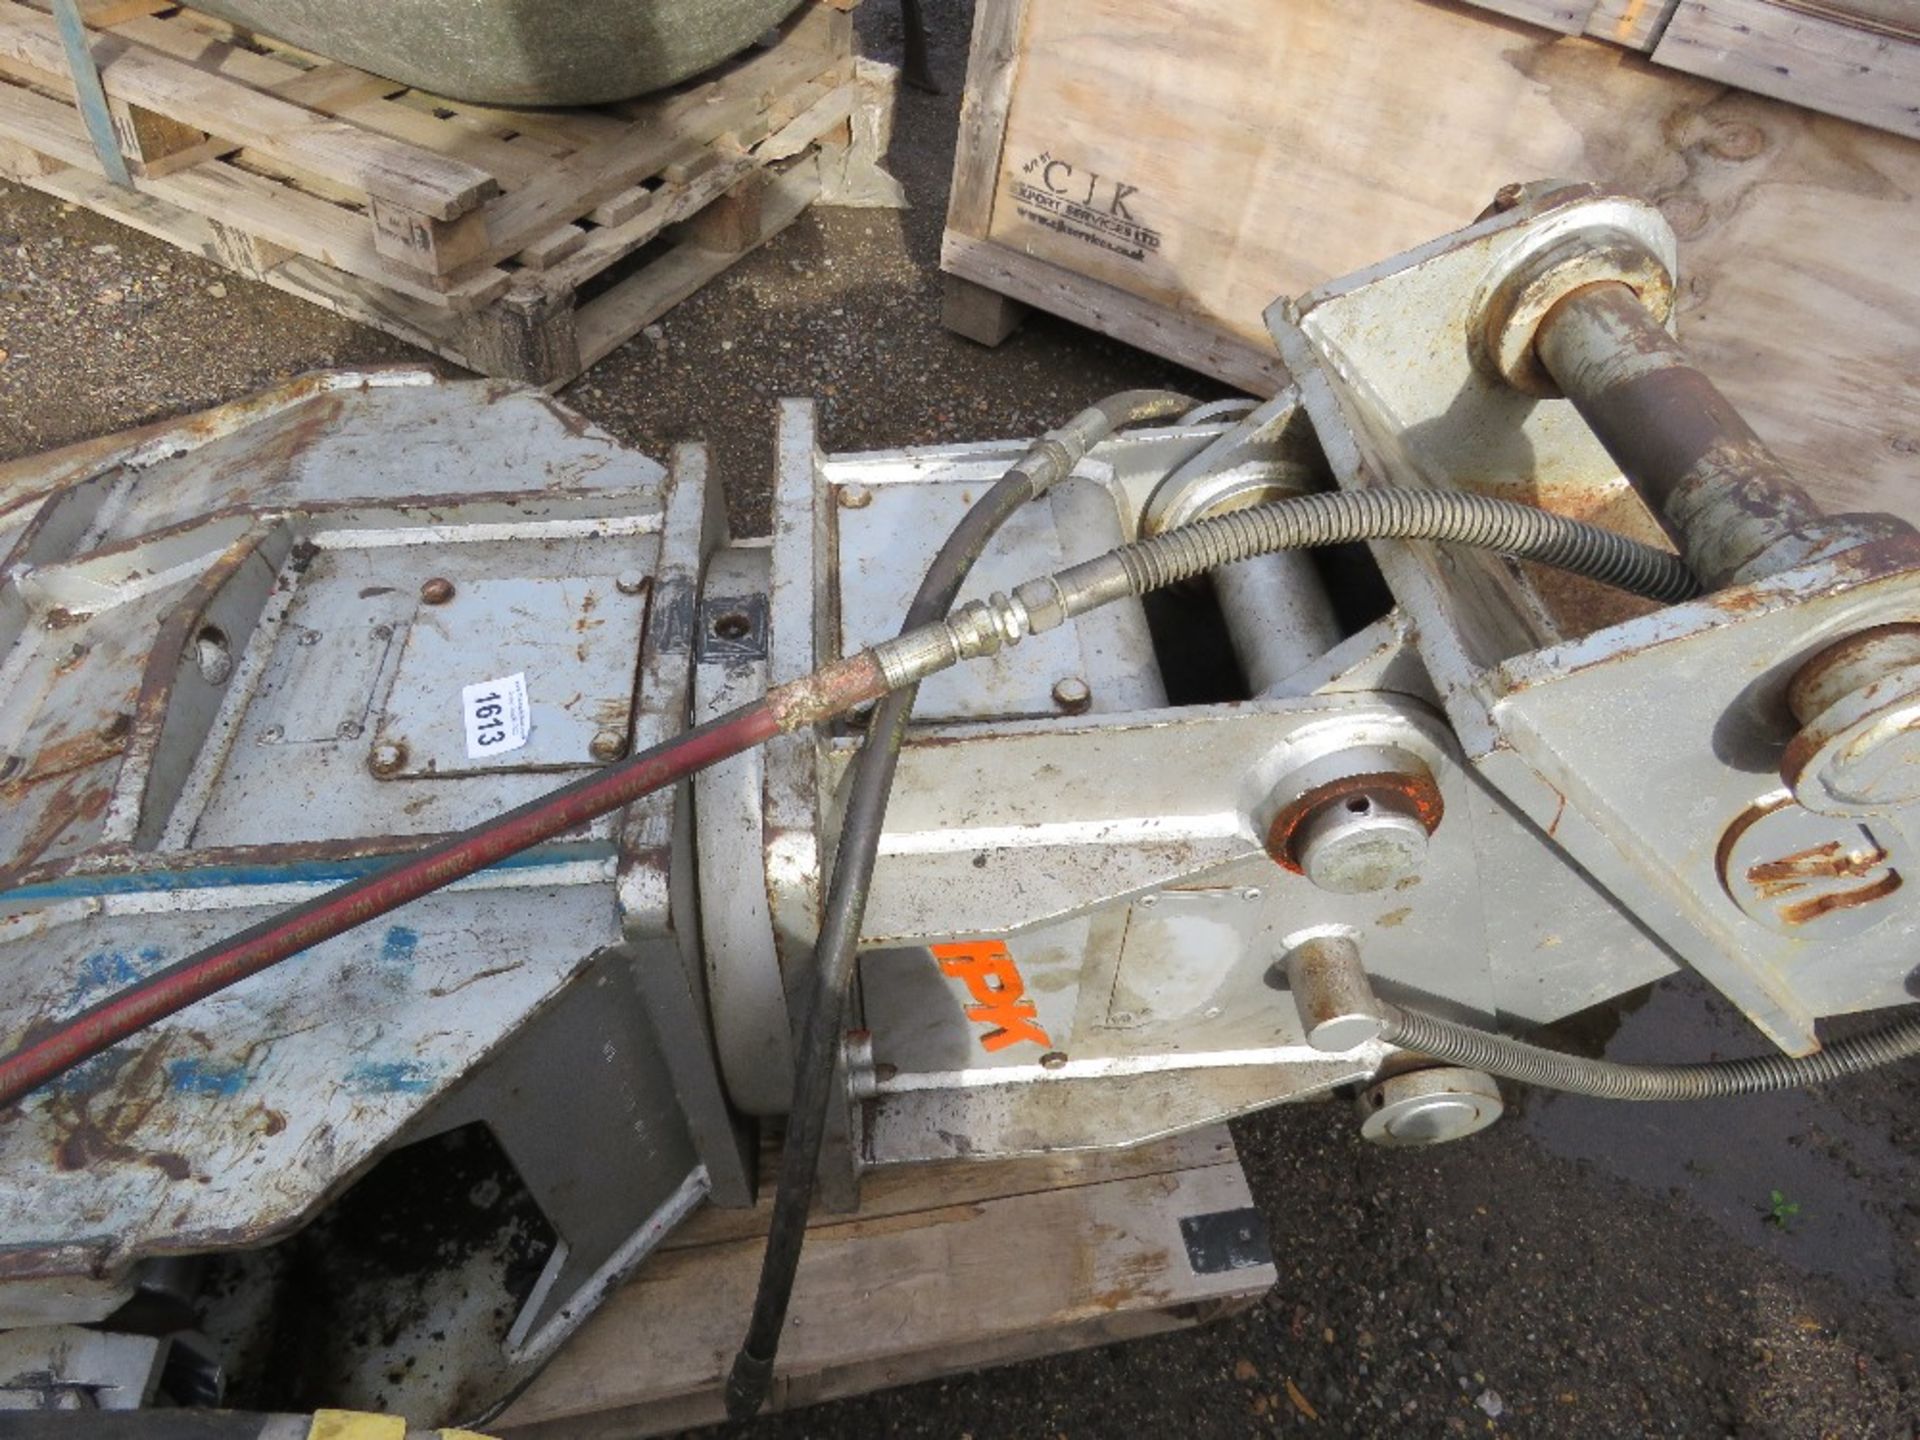 SET OF NPK S7X CRUSHER JAWS, EXCAVATOR MOUNTED ON 65MM PINS. - Image 9 of 9